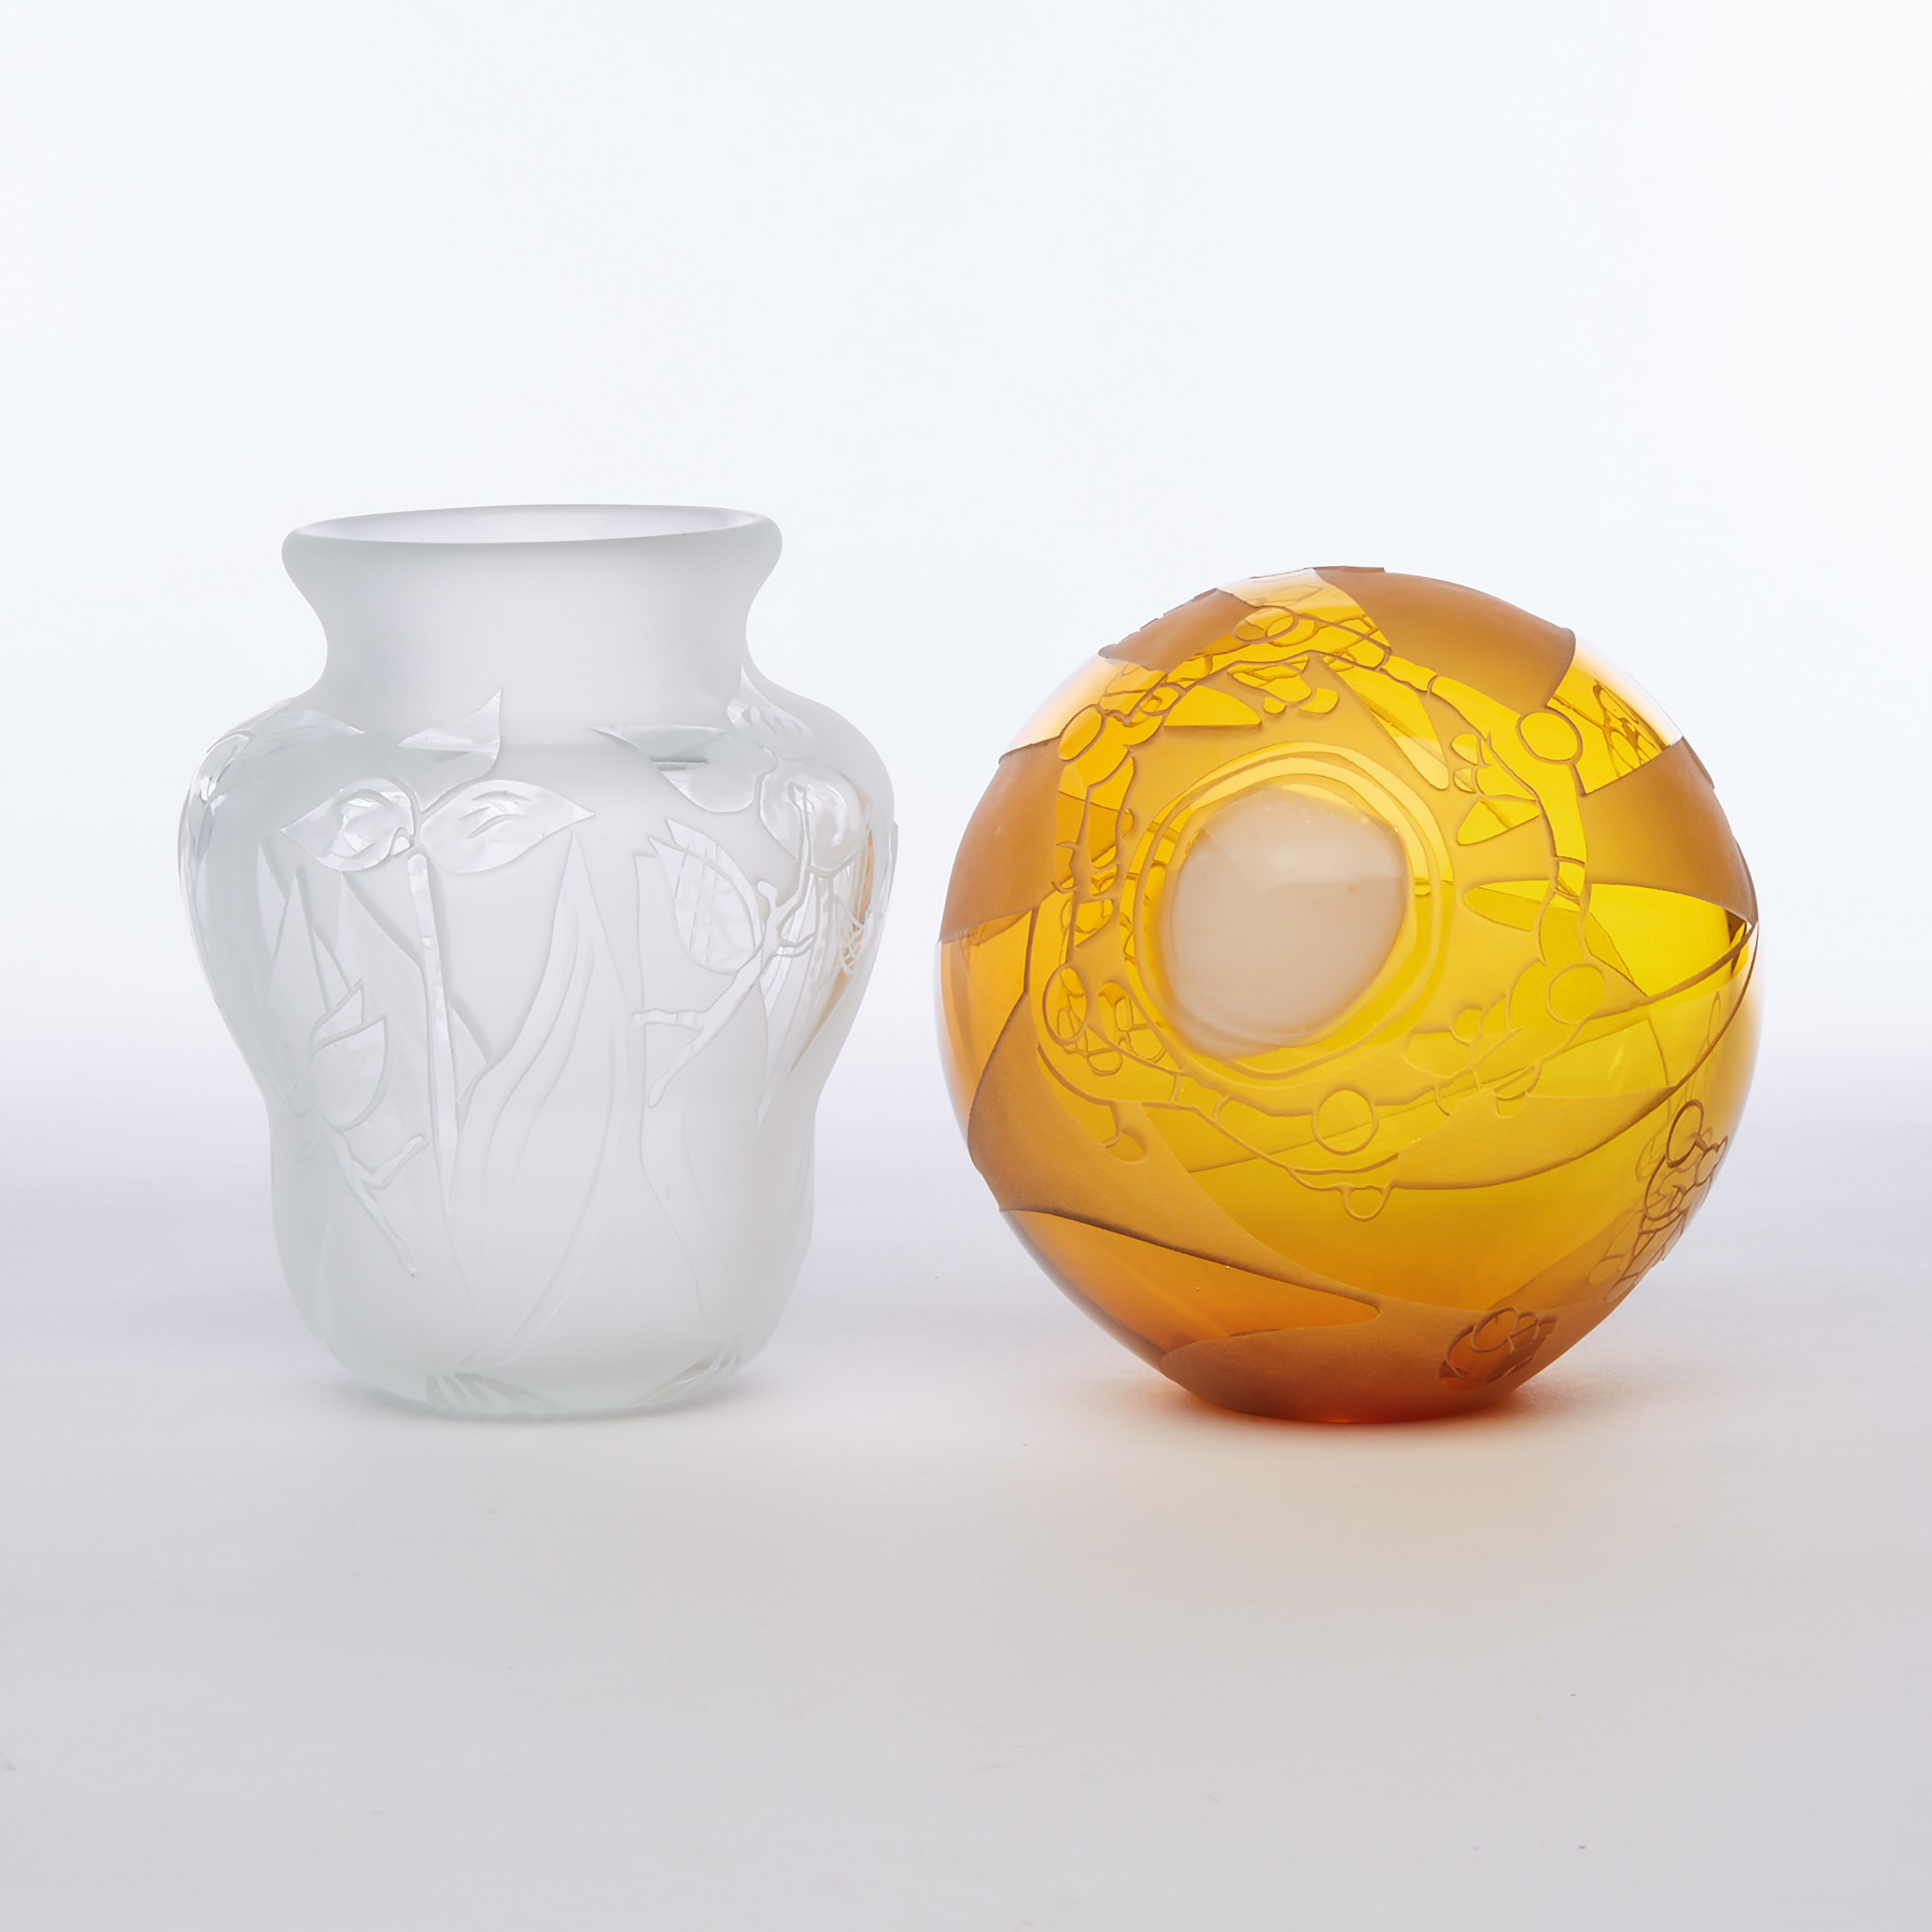 Kathryn Thomson (Canadian), 'Trillium Fairies' and 'Moon Dancing on the Sun' Cameo Glass Vase and Globe, 1980/82